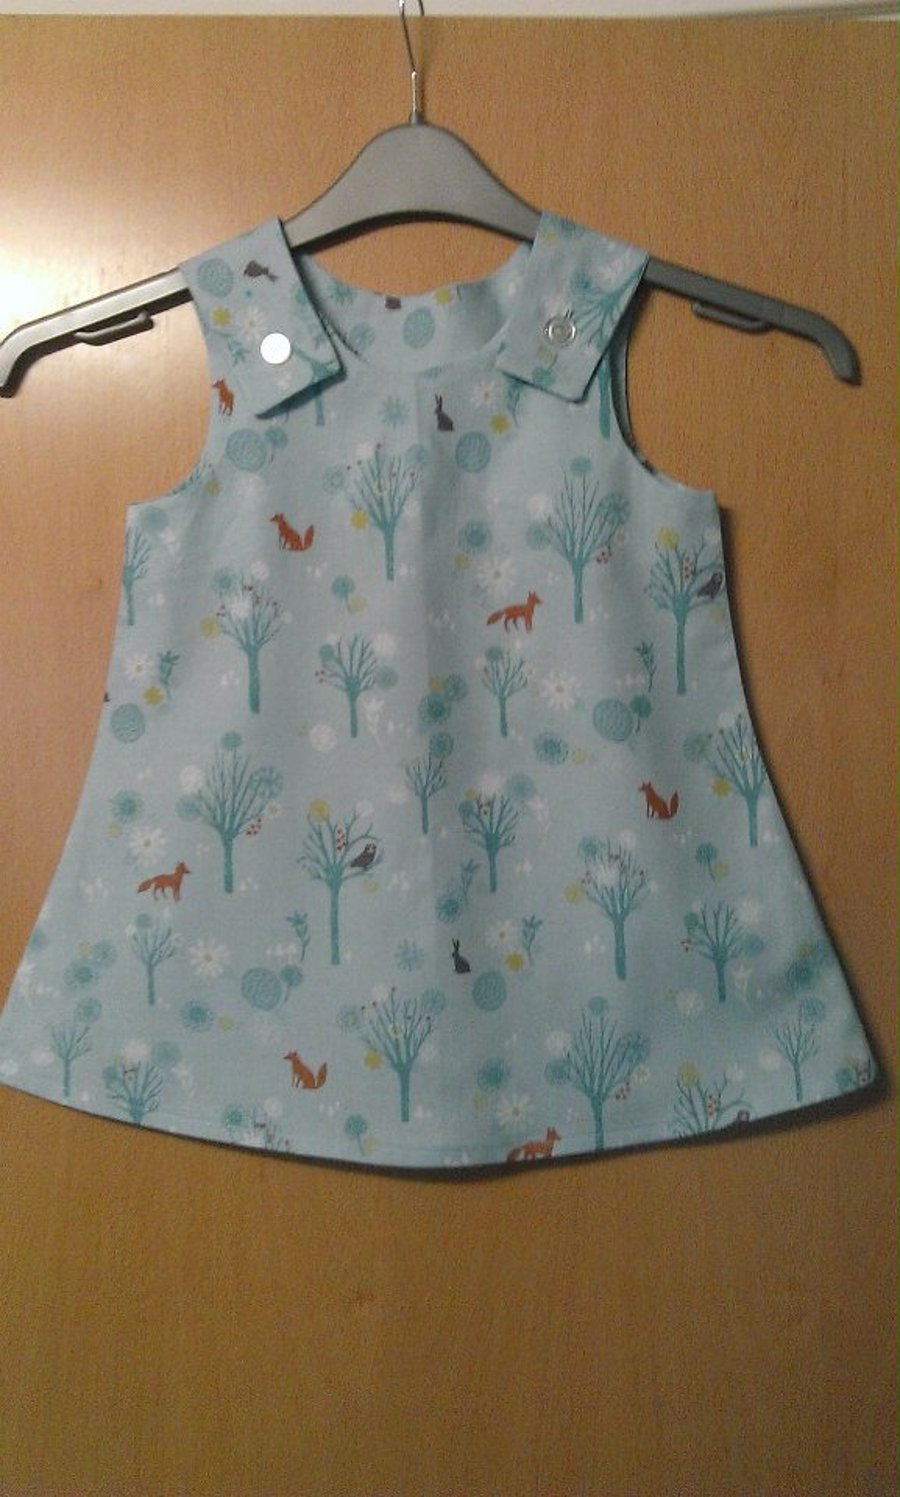 A-line dress for a 3 year old